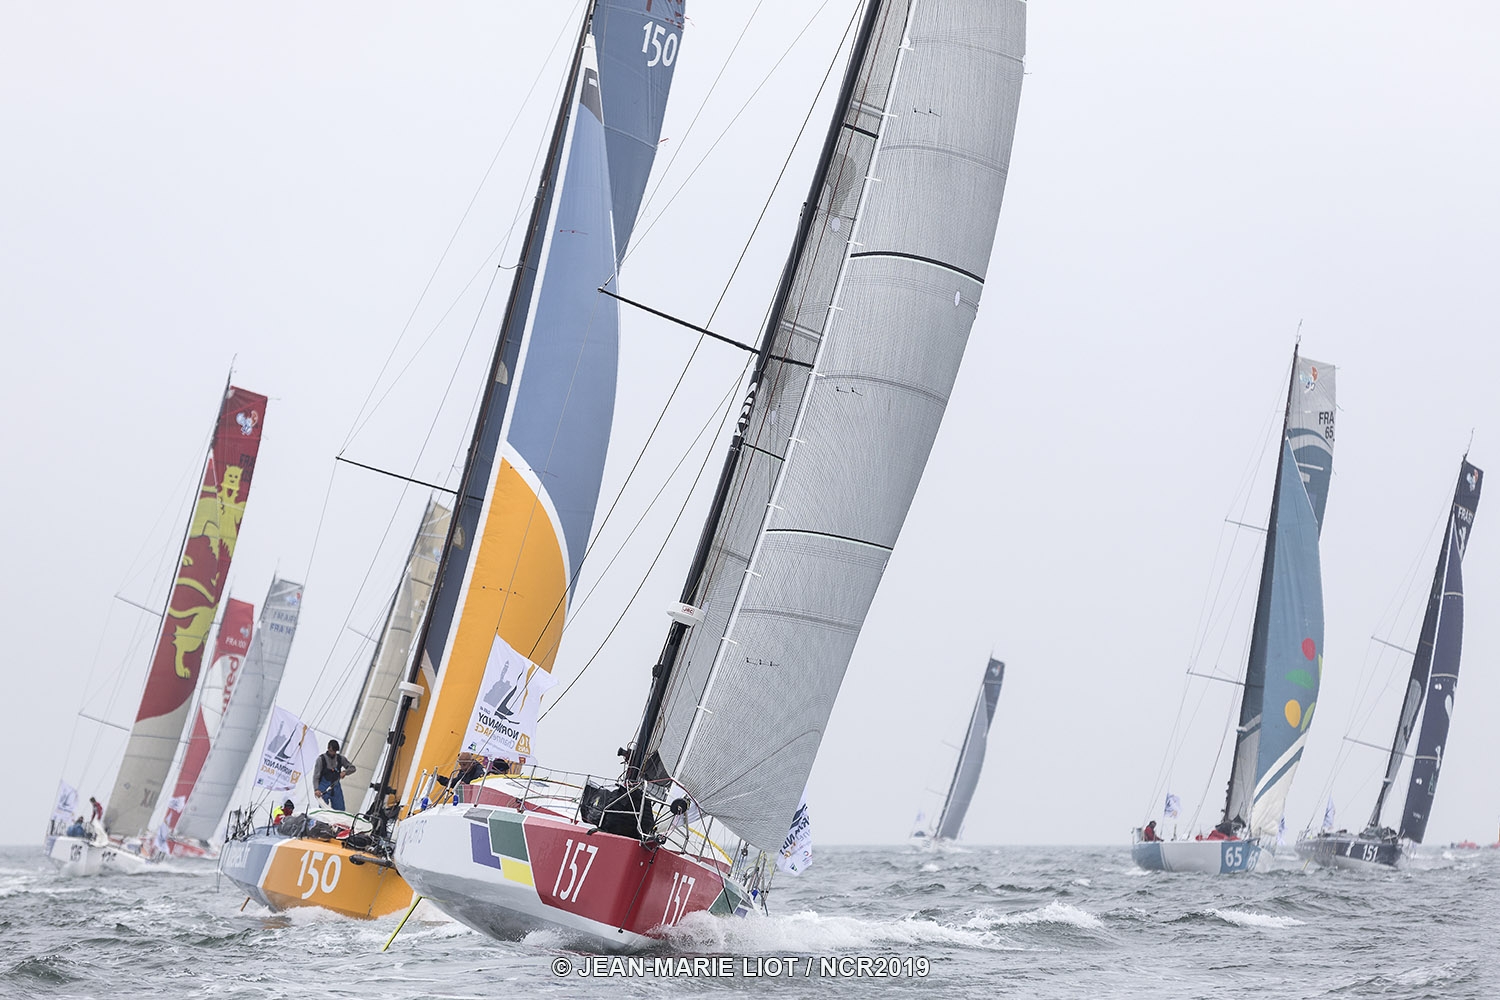  Class 40  Normandy Channel Race  Caen FRA  Start today, with Koster/Gautier SUI